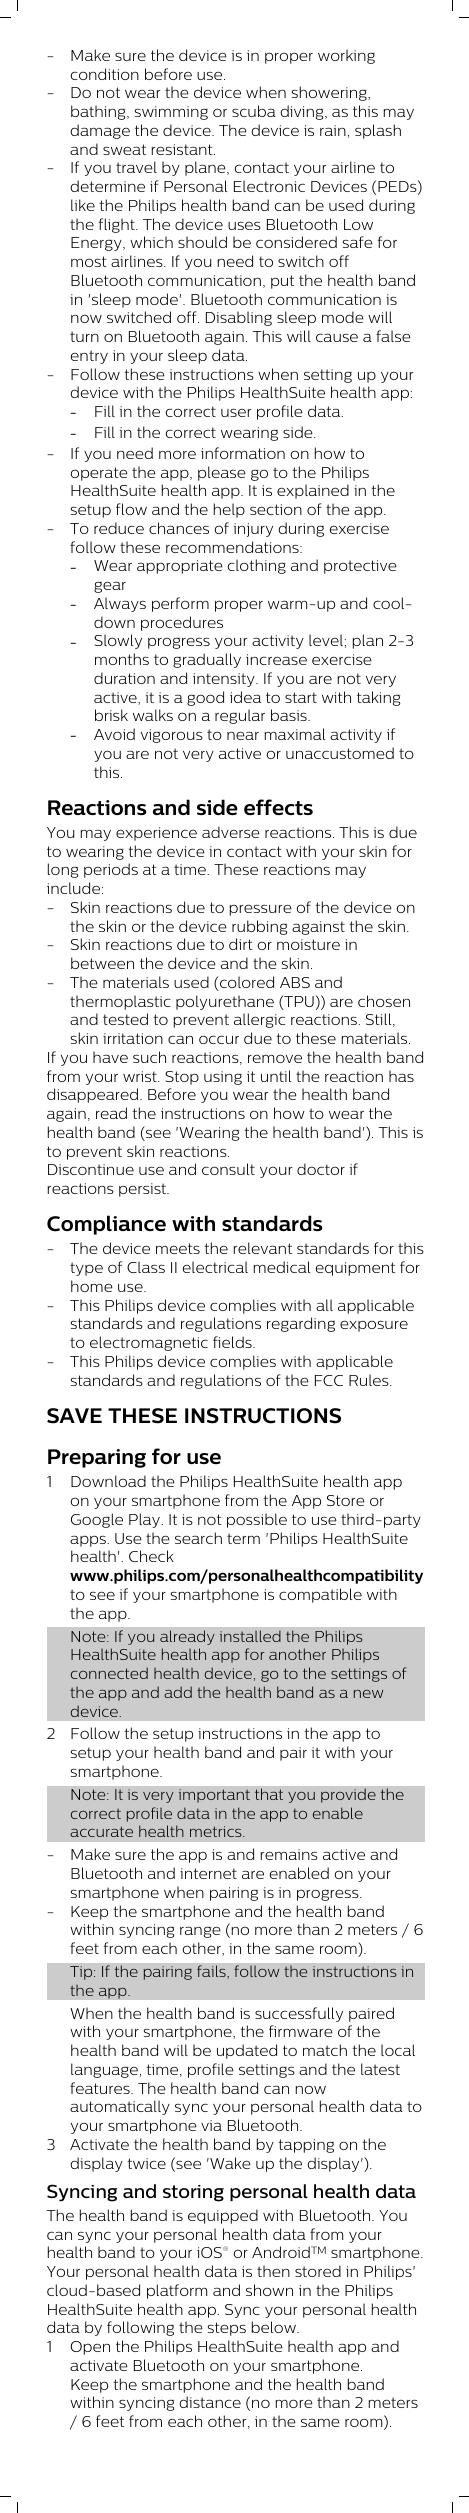 - Make sure the device is in proper workingcondition before use.- Do not wear the device when showering,bathing, swimming or scuba diving, as this maydamage the device. The device is rain, splashand sweat resistant.- If you travel by plane, contact your airline todetermine if Personal Electronic Devices (PEDs)like the Philips health band can be used duringthe flight. The device uses Bluetooth LowEnergy, which should be considered safe formost airlines. If you need to switch offBluetooth communication, put the health bandin &apos;sleep mode&apos;. Bluetooth communication isnow switched off. Disabling sleep mode willturn on Bluetooth again. This will cause a falseentry in your sleep data.- Follow these instructions when setting up yourdevice with the Philips HealthSuite health app:-Fill in the correct user profile data.-Fill in the correct wearing side.- If you need more information on how tooperate the app, please go to the PhilipsHealthSuite health app. It is explained in thesetup flow and the help section of the app.- To reduce chances of injury during exercisefollow these recommendations:-Wear appropriate clothing and protectivegear-Always perform proper warm-up and cool-down procedures-Slowly progress your activity level; plan 2-3months to gradually increase exerciseduration and intensity. If you are not veryactive, it is a good idea to start with takingbrisk walks on a regular basis.-Avoid vigorous to near maximal activity ifyou are not very active or unaccustomed tothis.Reactions and side effectsYou may experience adverse reactions. This is dueto wearing the device in contact with your skin forlong periods at a time. These reactions mayinclude:- Skin reactions due to pressure of the device onthe skin or the device rubbing against the skin.- Skin reactions due to dirt or moisture inbetween the device and the skin.- The materials used (colored ABS andthermoplastic polyurethane (TPU)) are chosenand tested to prevent allergic reactions. Still,skin irritation can occur due to these materials.If you have such reactions, remove the health bandfrom your wrist. Stop using it until the reaction hasdisappeared. Before you wear the health bandagain, read the instructions on how to wear thehealth band (see &apos;Wearing the health band&apos;). This isto prevent skin reactions.Discontinue use and consult your doctor ifreactions persist.Compliance with standards- The device meets the relevant standards for thistype of Class II electrical medical equipment forhome use.- This Philips device complies with all applicablestandards and regulations regarding exposureto electromagnetic fields.- This Philips device complies with applicablestandards and regulations of the FCC Rules.SAVE THESE INSTRUCTIONSPreparing for use1 Download the Philips HealthSuite health appon your smartphone from the App Store orGoogle Play. It is not possible to use third-partyapps. Use the search term &apos;Philips HealthSuitehealth&apos;. Checkwww.philips.com/personalhealthcompatibilityto see if your smartphone is compatible withthe app.Note: If you already installed the PhilipsHealthSuite health app for another Philipsconnected health device, go to the settings ofthe app and add the health band as a newdevice.2 Follow the setup instructions in the app tosetup your health band and pair it with yoursmartphone.Note: It is very important that you provide thecorrect profile data in the app to enableaccurate health metrics.- Make sure the app is and remains active andBluetooth and internet are enabled on yoursmartphone when pairing is in progress.- Keep the smartphone and the health bandwithin syncing range (no more than 2 meters / 6feet from each other, in the same room).Tip: If the pairing fails, follow the instructions inthe app.When the health band is successfully pairedwith your smartphone, the firmware of thehealth band will be updated to match the locallanguage, time, profile settings and the latestfeatures. The health band can nowautomatically sync your personal health data toyour smartphone via Bluetooth.3 Activate the health band by tapping on thedisplay twice (see &apos;Wake up the display&apos;).Syncing and storing personal health dataThe health band is equipped with Bluetooth. Youcan sync your personal health data from yourhealth band to your iOS® or AndroidTM smartphone.Your personal health data is then stored in Philips&apos;cloud-based platform and shown in the PhilipsHealthSuite health app. Sync your personal healthdata by following the steps below.1 Open the Philips HealthSuite health app andactivate Bluetooth on your smartphone.Keep the smartphone and the health bandwithin syncing distance (no more than 2 meters/ 6 feet from each other, in the same room).